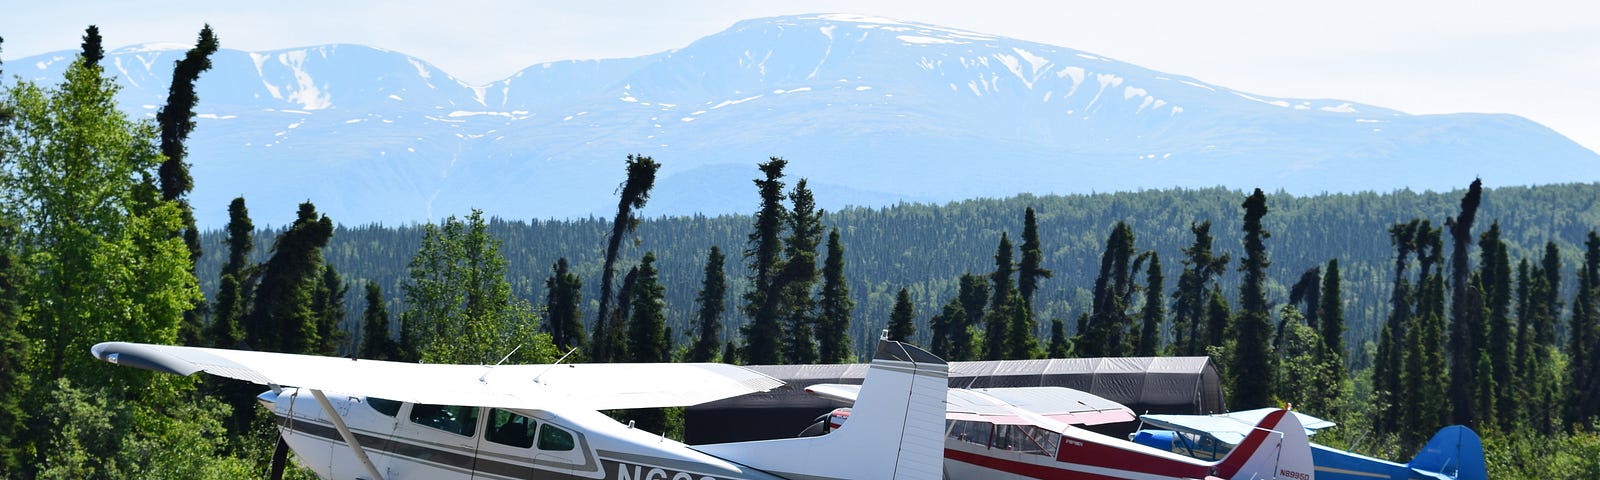 Parked Cessna planes in the Alaska.